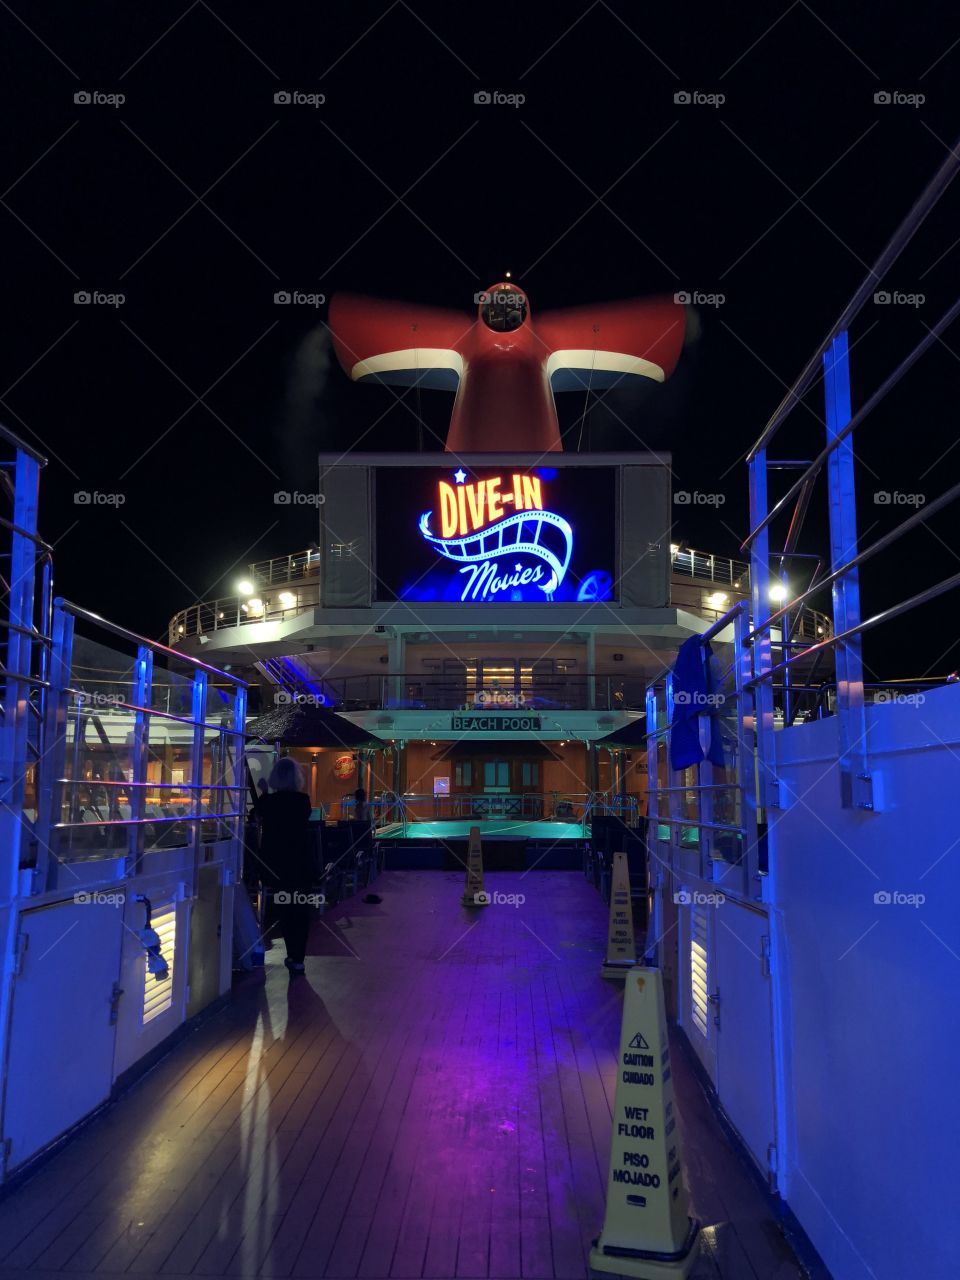 Carnival Sunshine Cruise Dive-In Movies on the top ledo deck